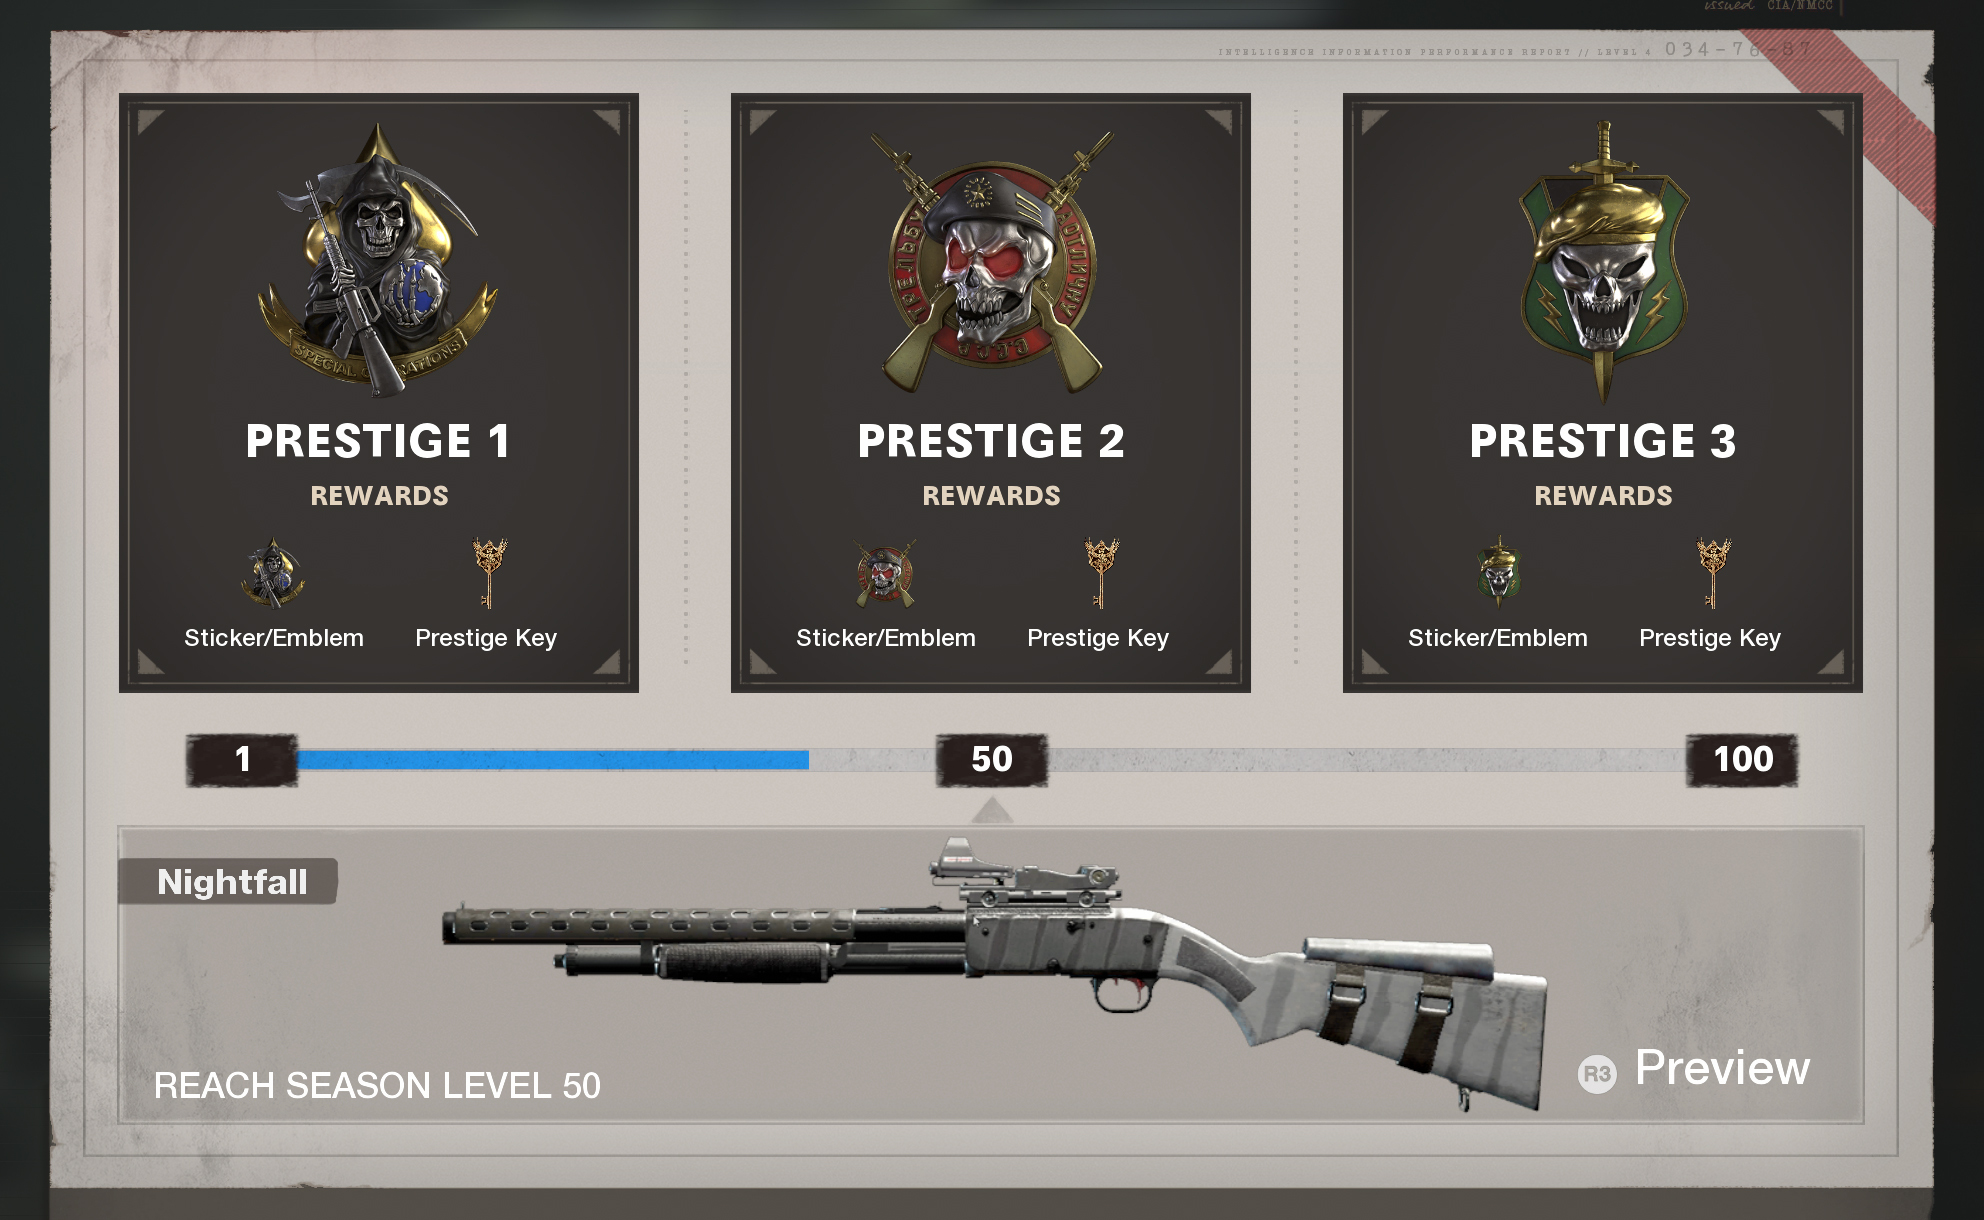 NEW CODE] HOW TO PRESTIGE LEVEL FAST *EASIEST METHOD* GET NEW